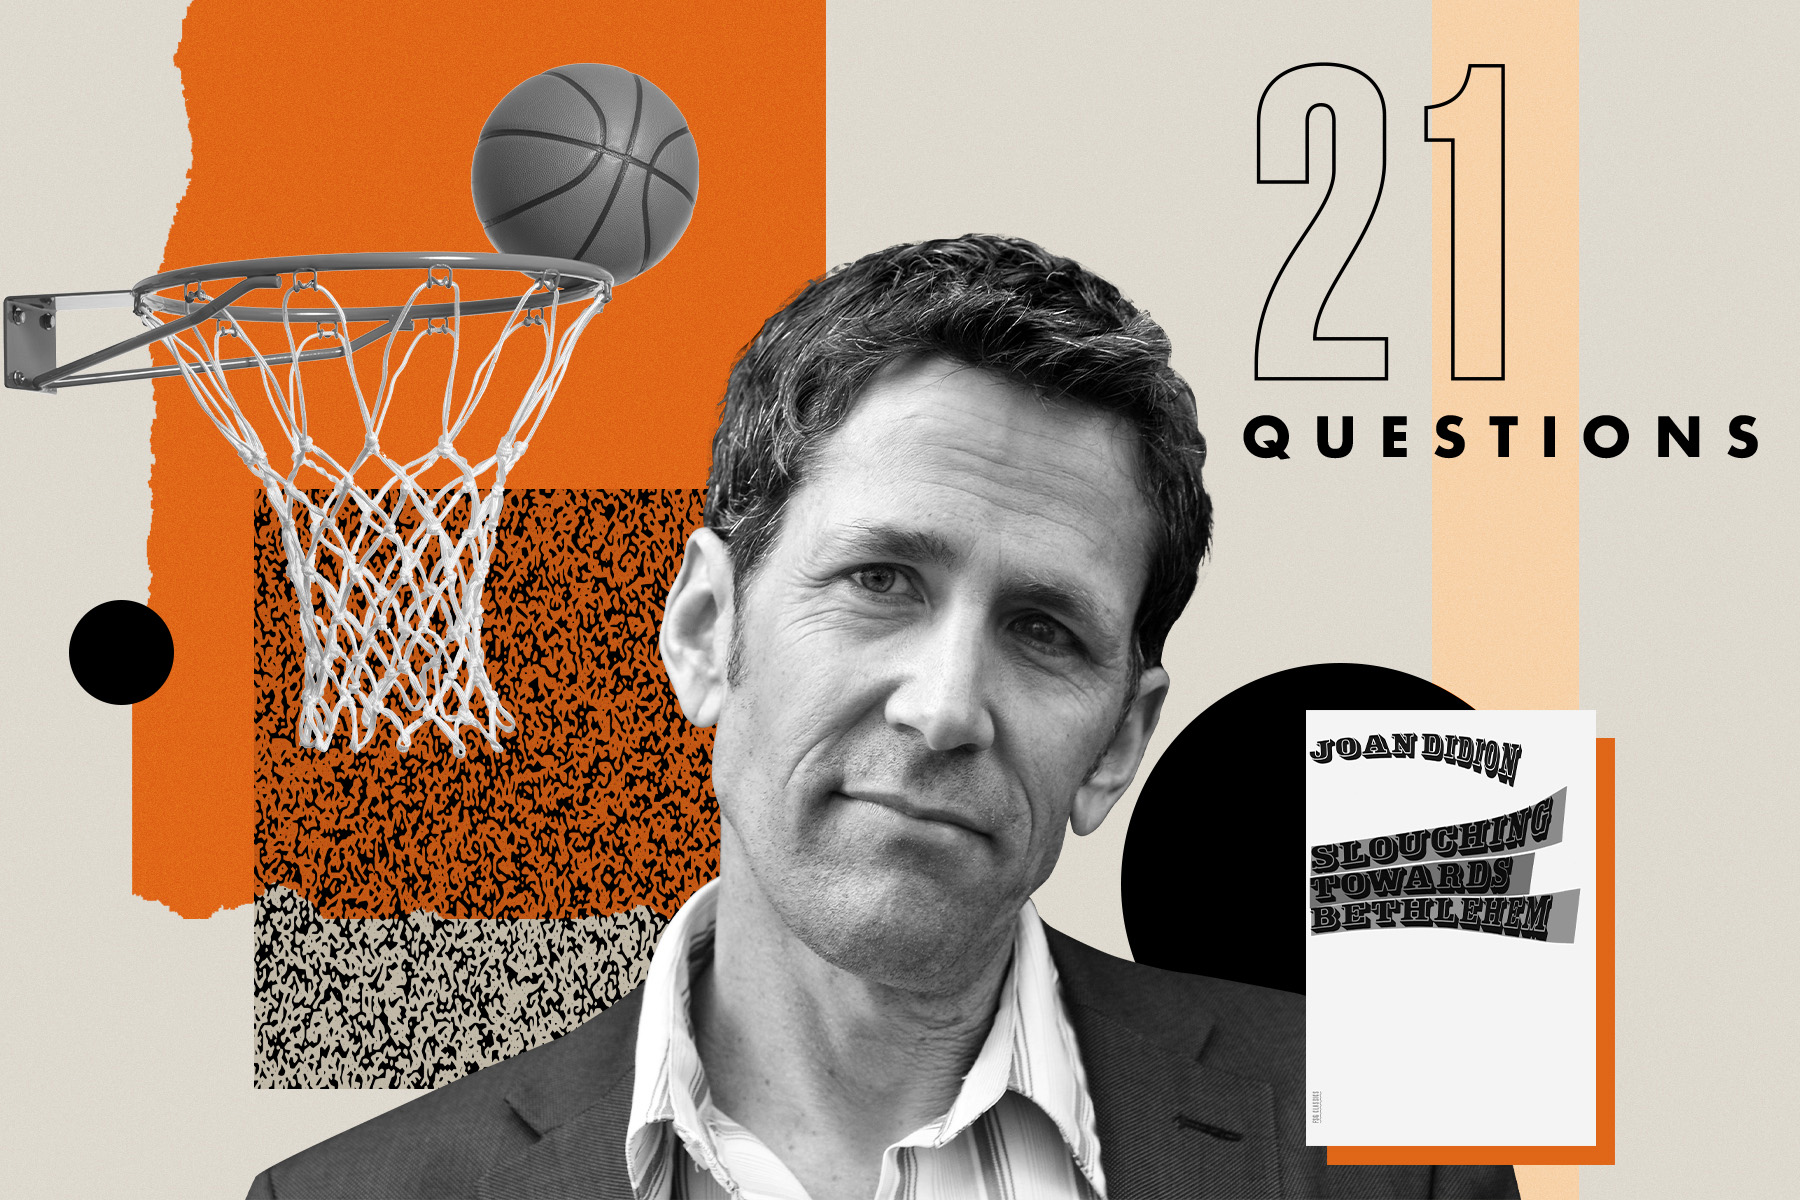 A photo of Jess Walters in black and white against an orange-tinged background, with a basketball hoop, a copy of Joan Didion's Sloughing Towards Bethlehem and the words "21 questions" in the top right hand corner 